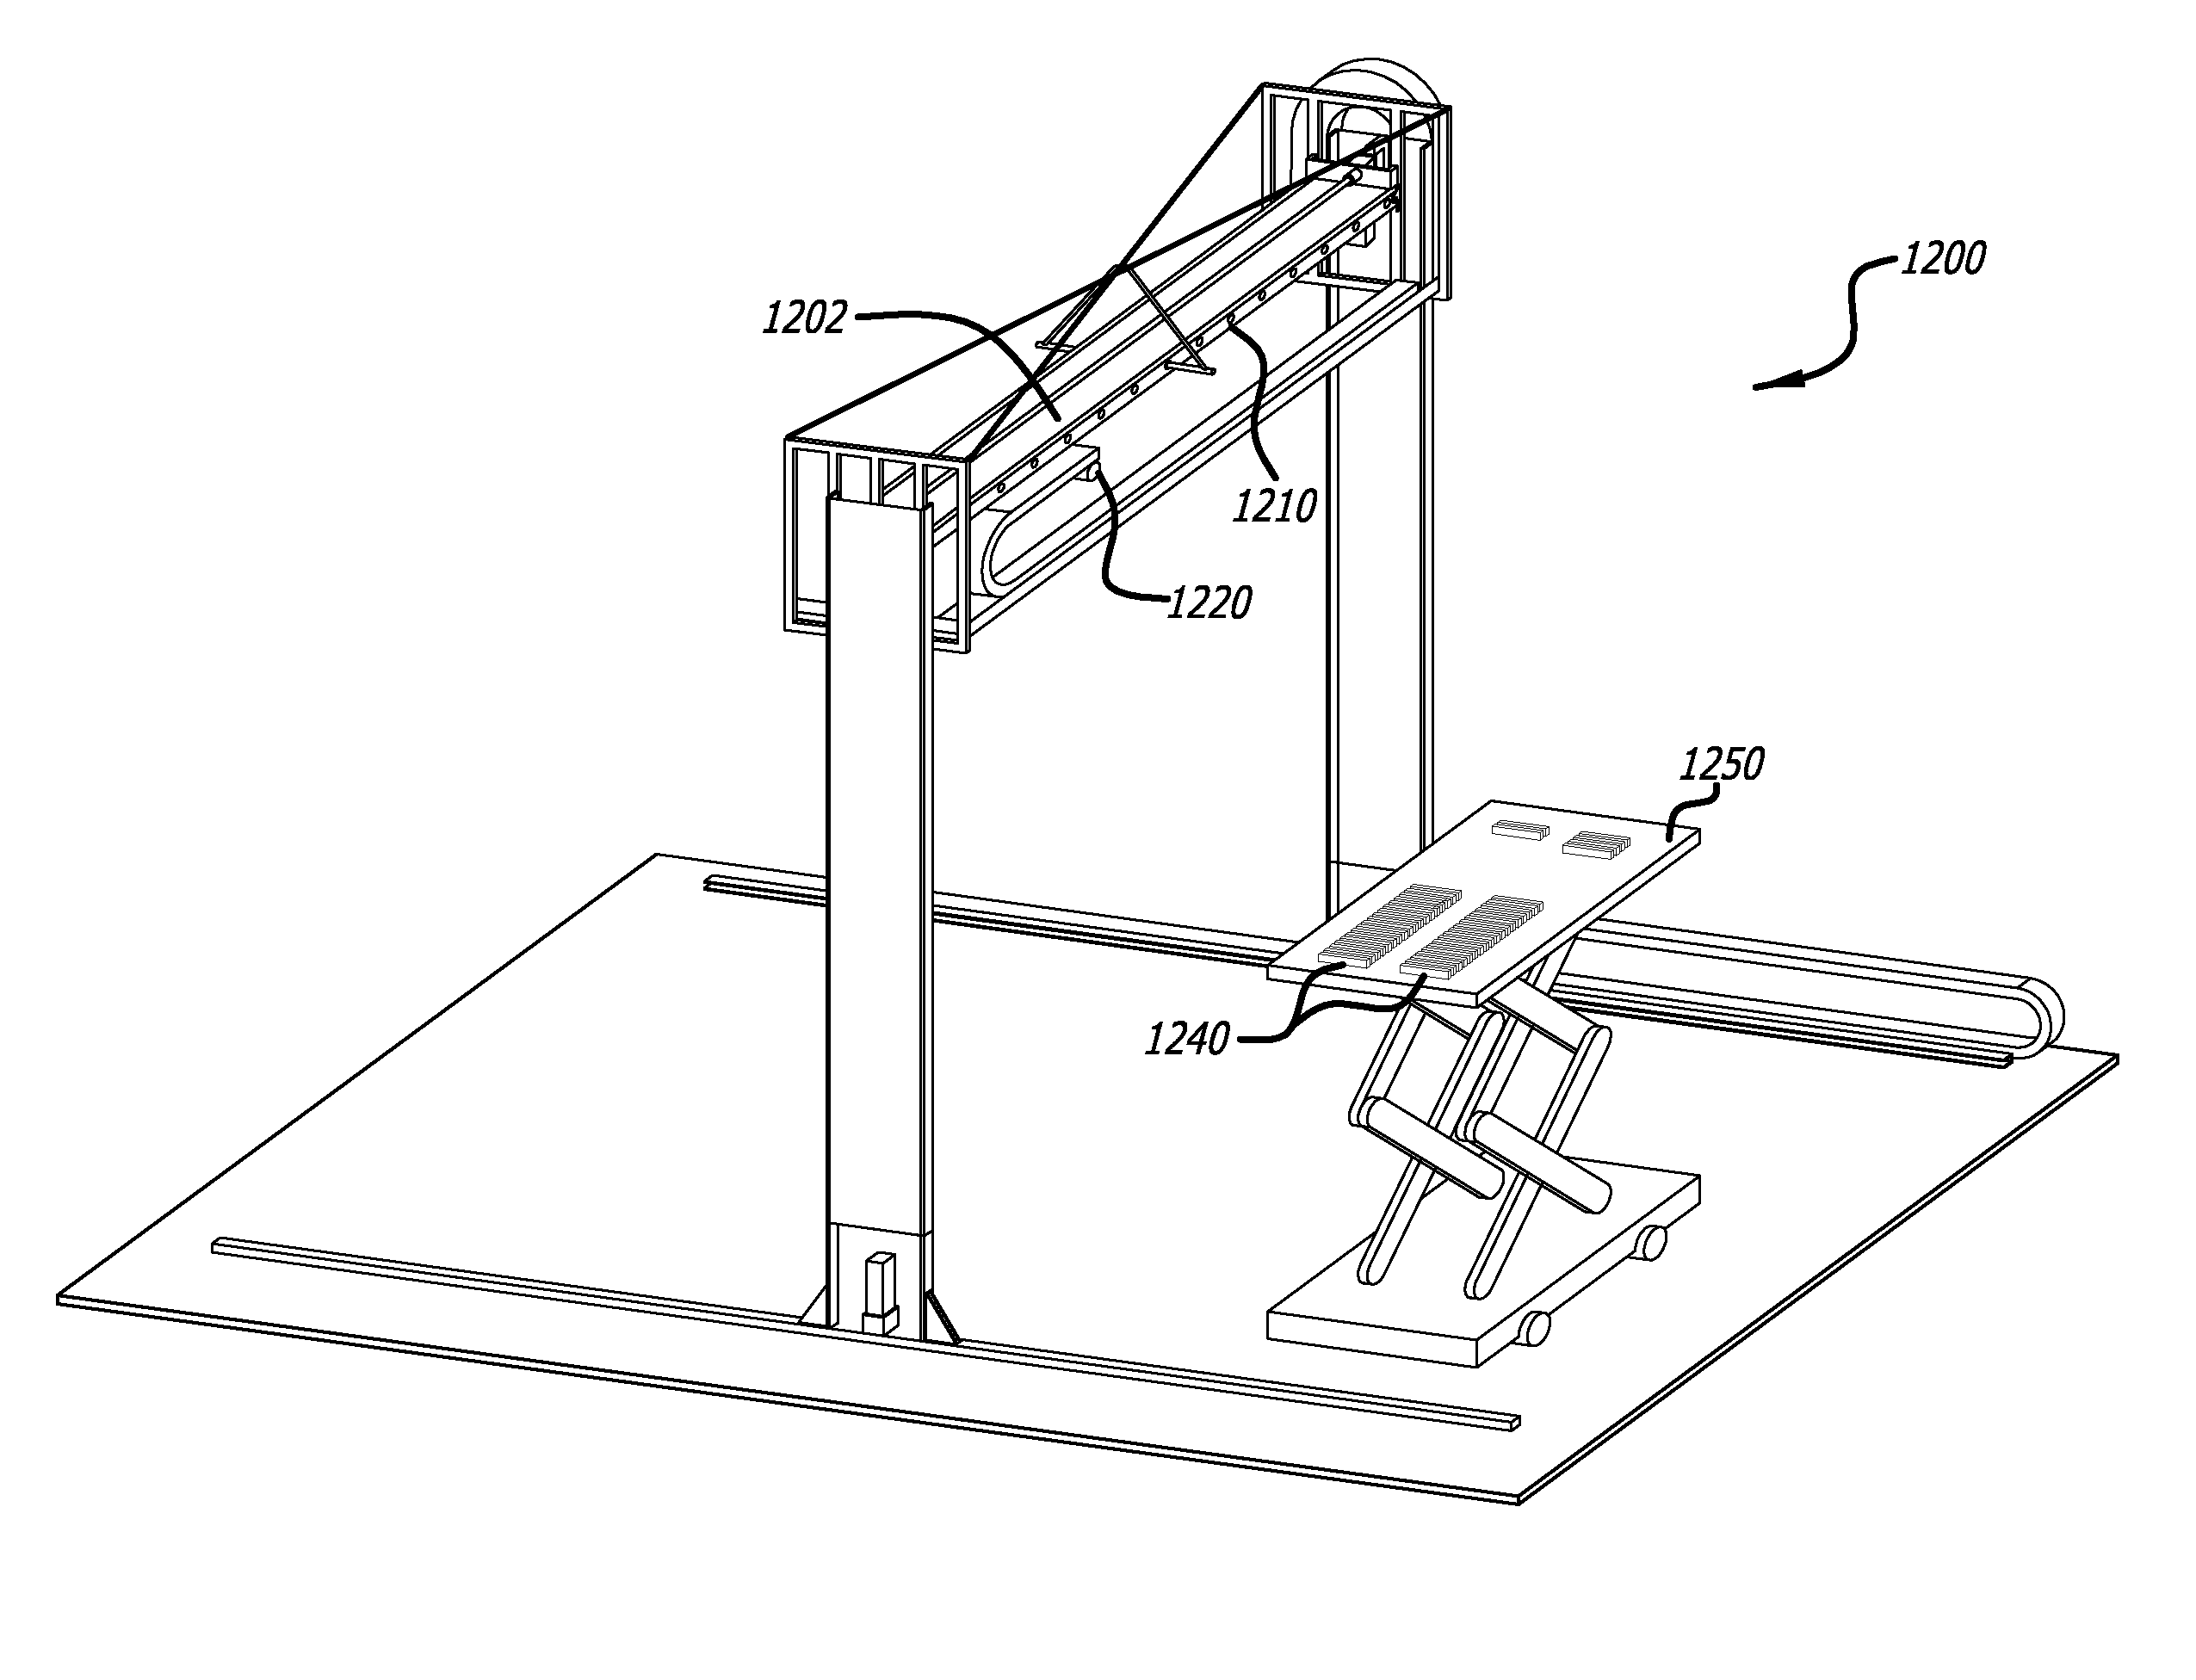 Gantry robotics system and related material transport for contour crafting